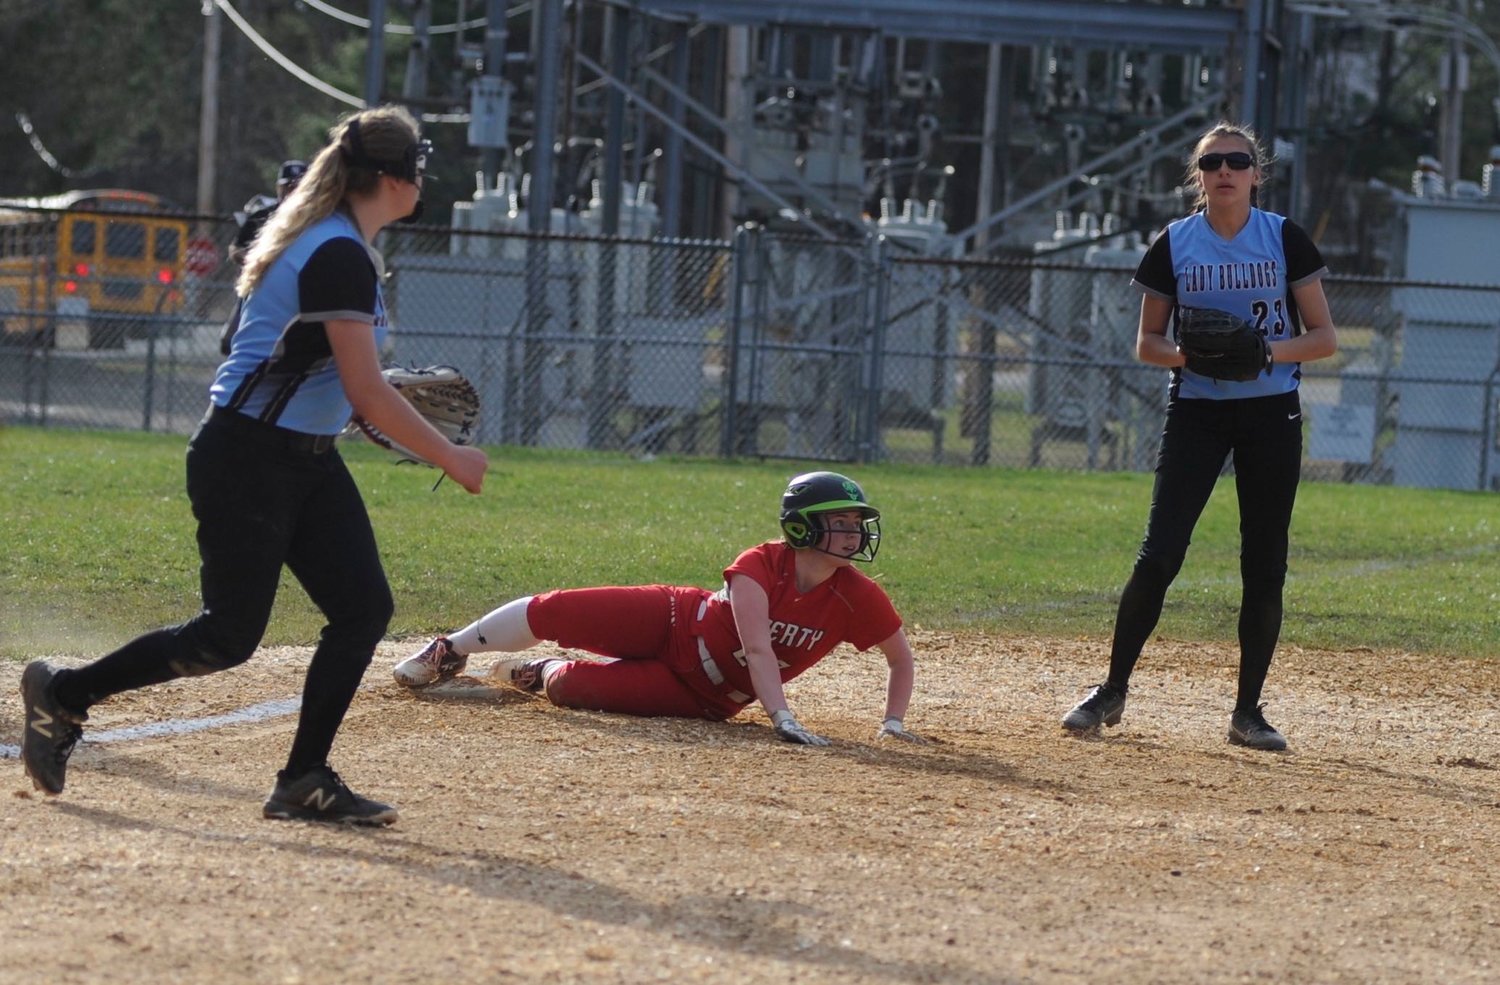 Double-teamed. Liberty’s Katy Decker is safe at third, surrounded by Riley Ernst and Josephine Martinez of Sullivan West.